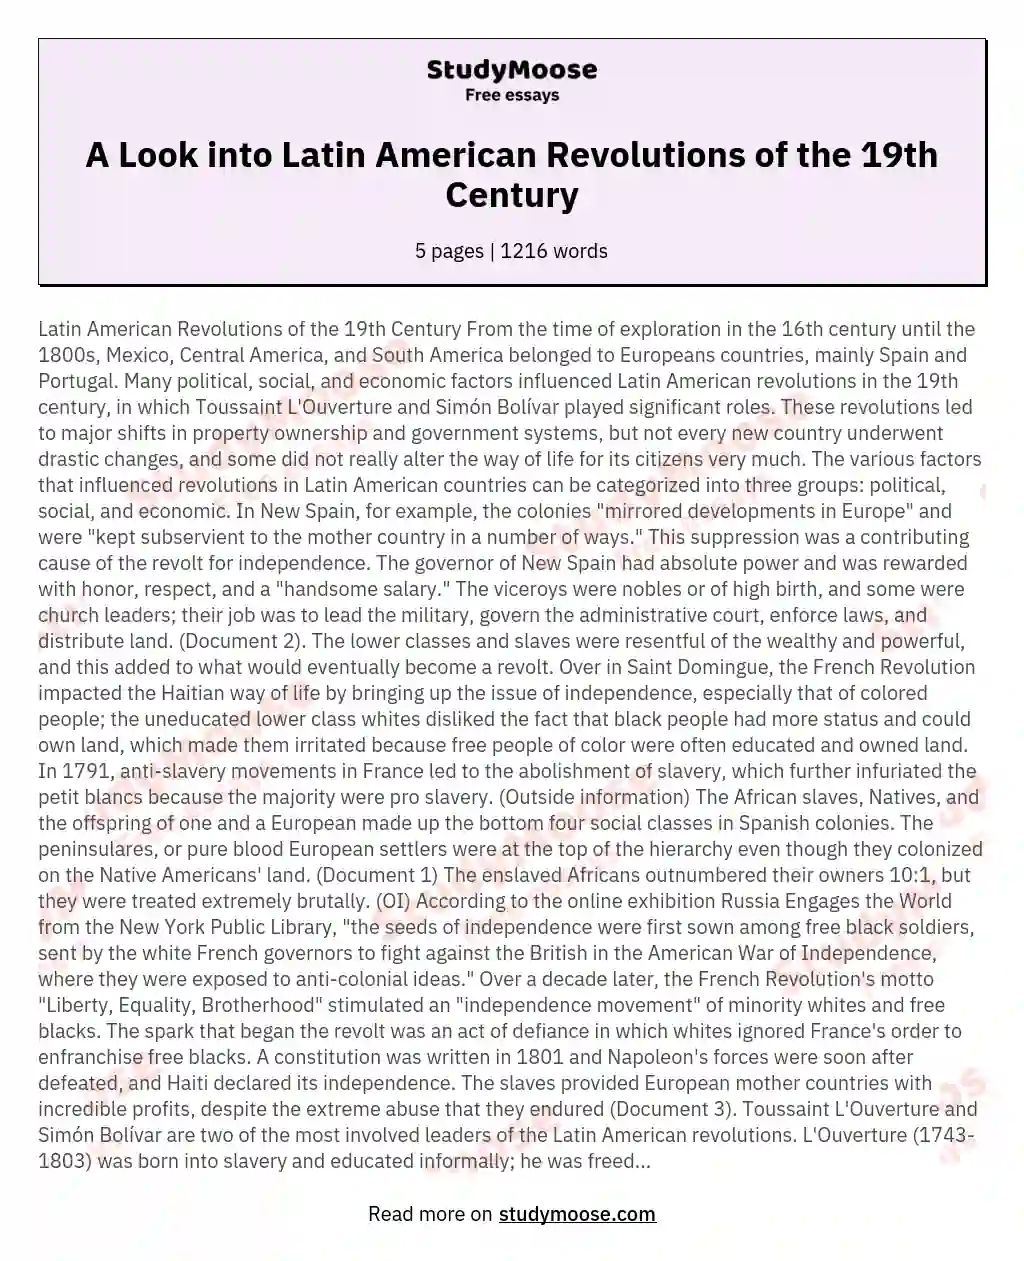 A Look into Latin American Revolutions of the 19th Century essay